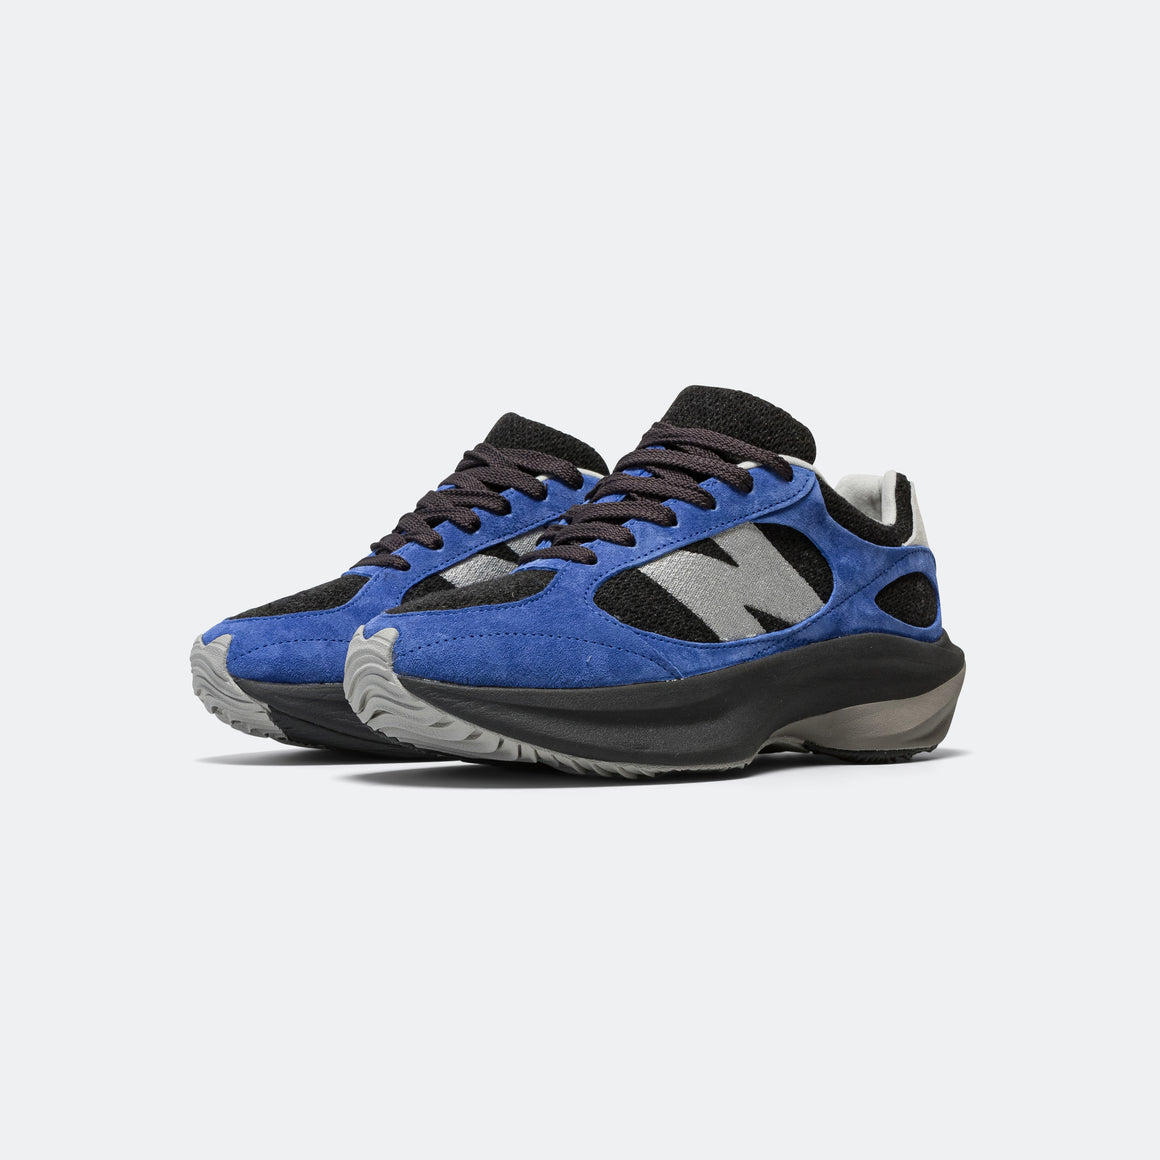 New Balance - WRPD RUNNER - Black/Blue - UP THERE